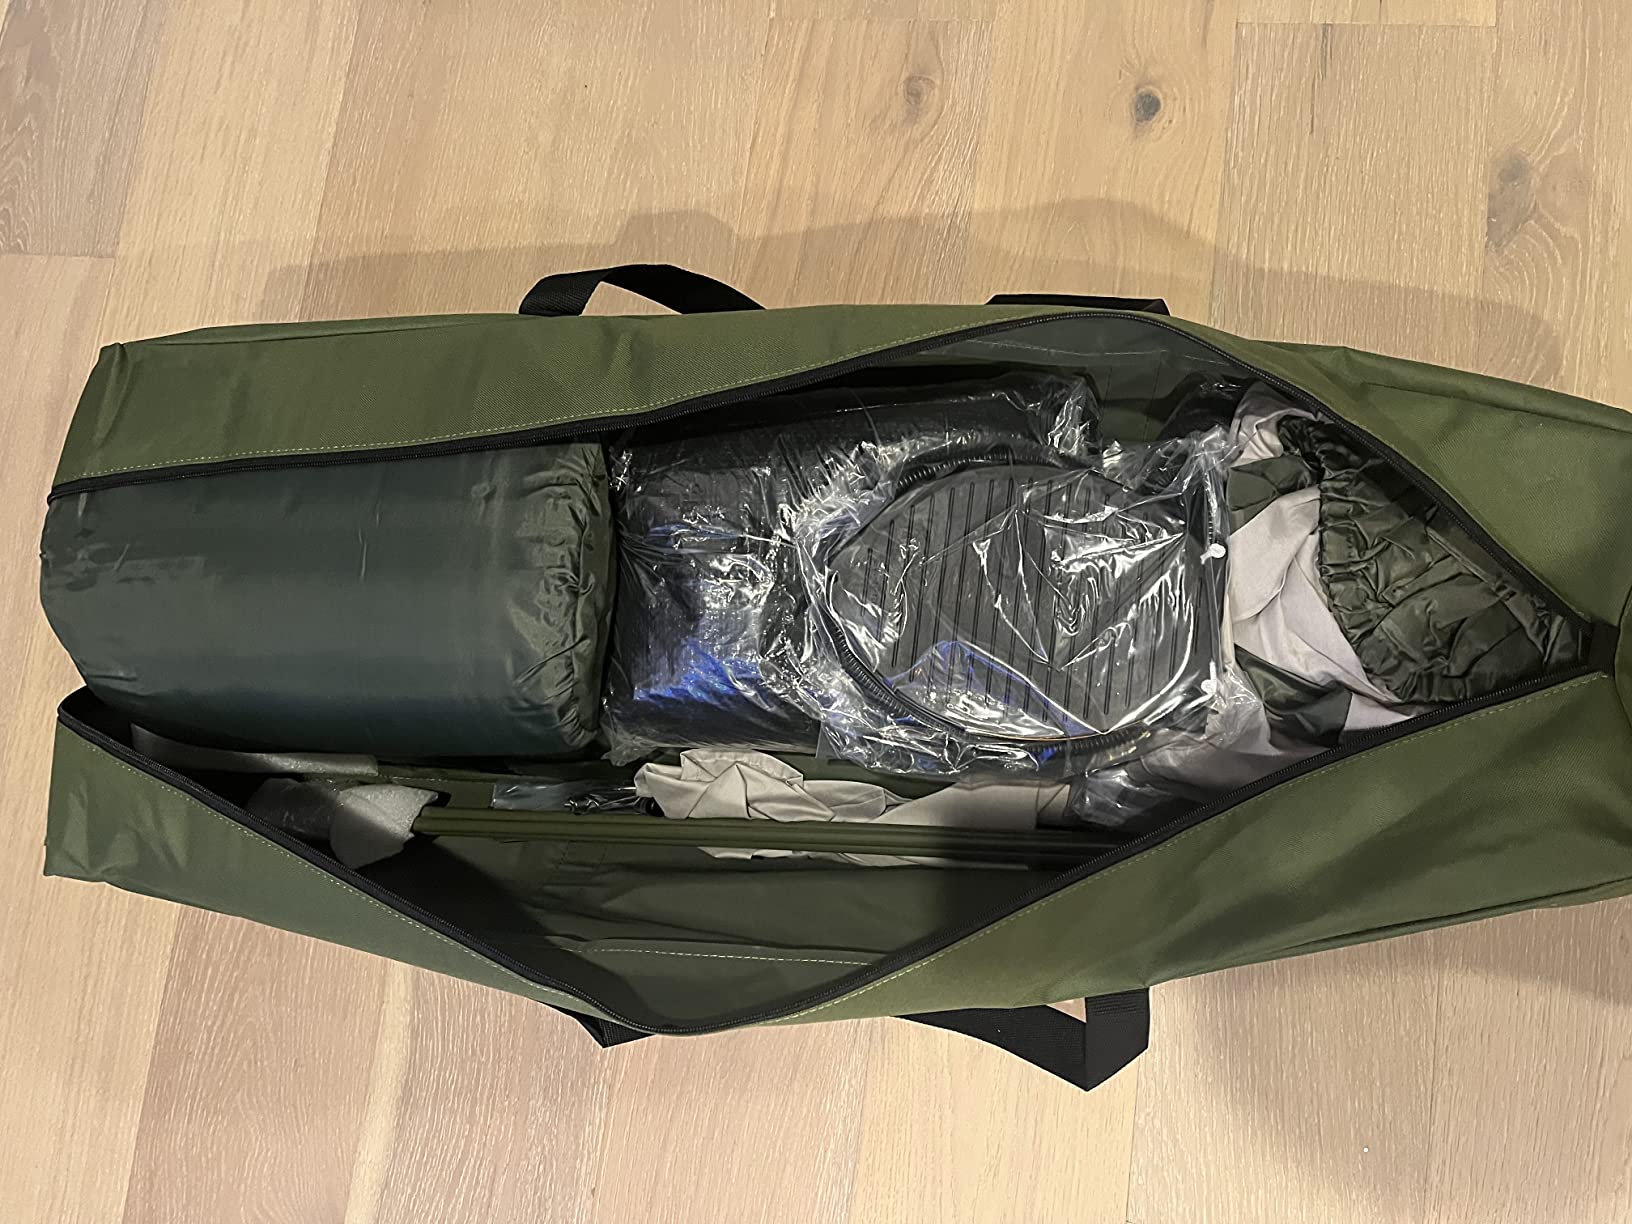 Easy setup and storage in a carry bag!